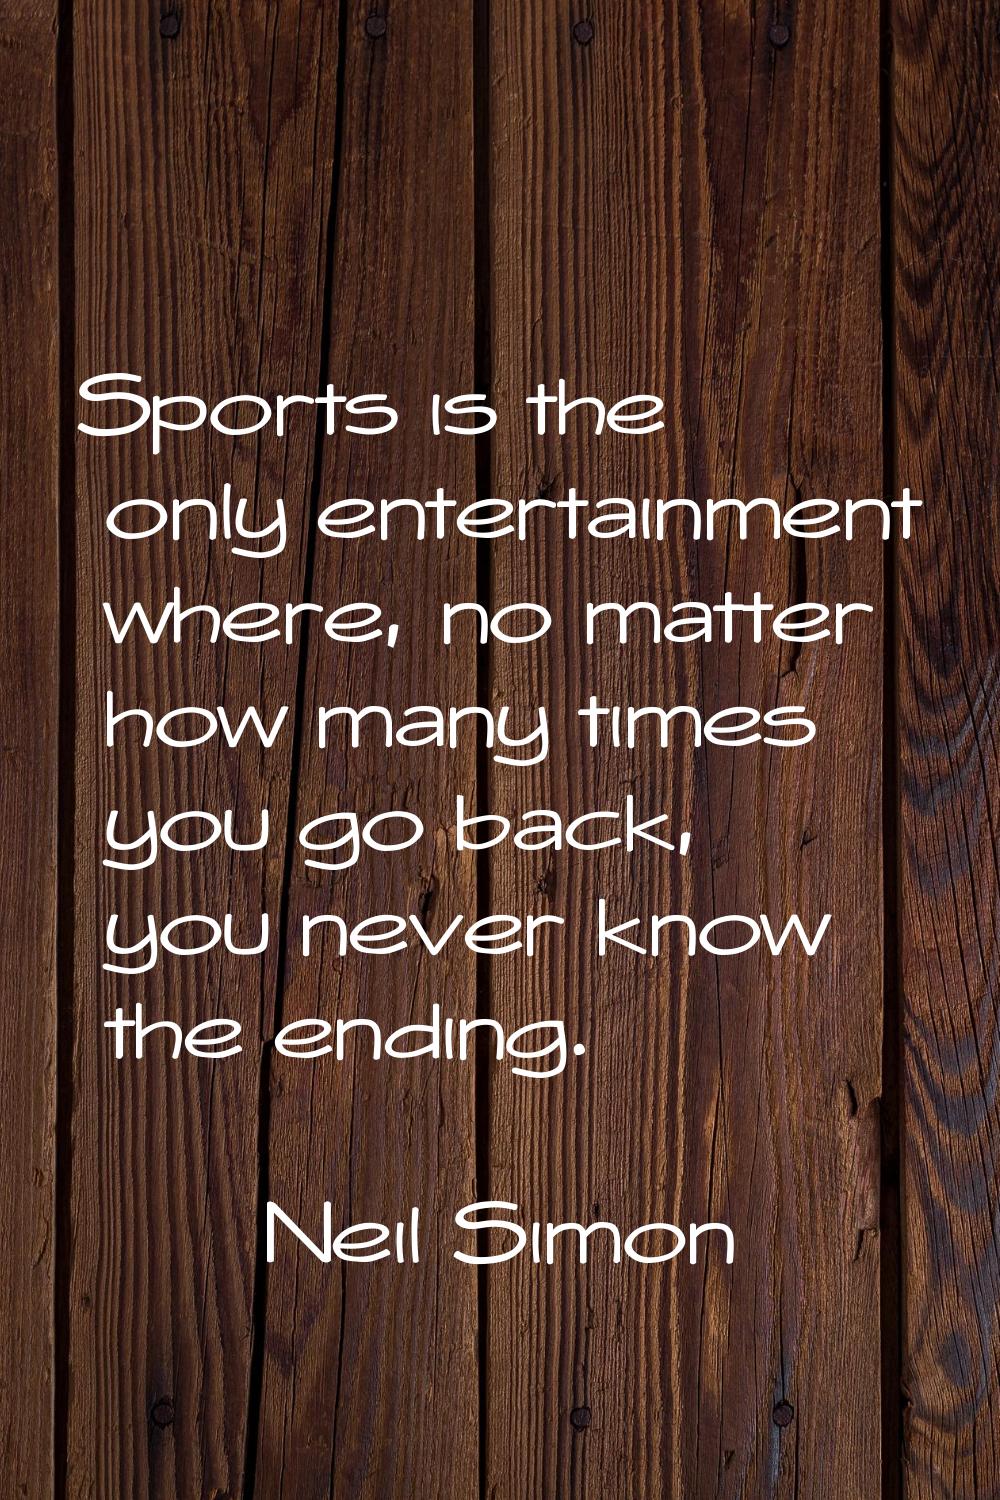 Sports is the only entertainment where, no matter how many times you go back, you never know the en